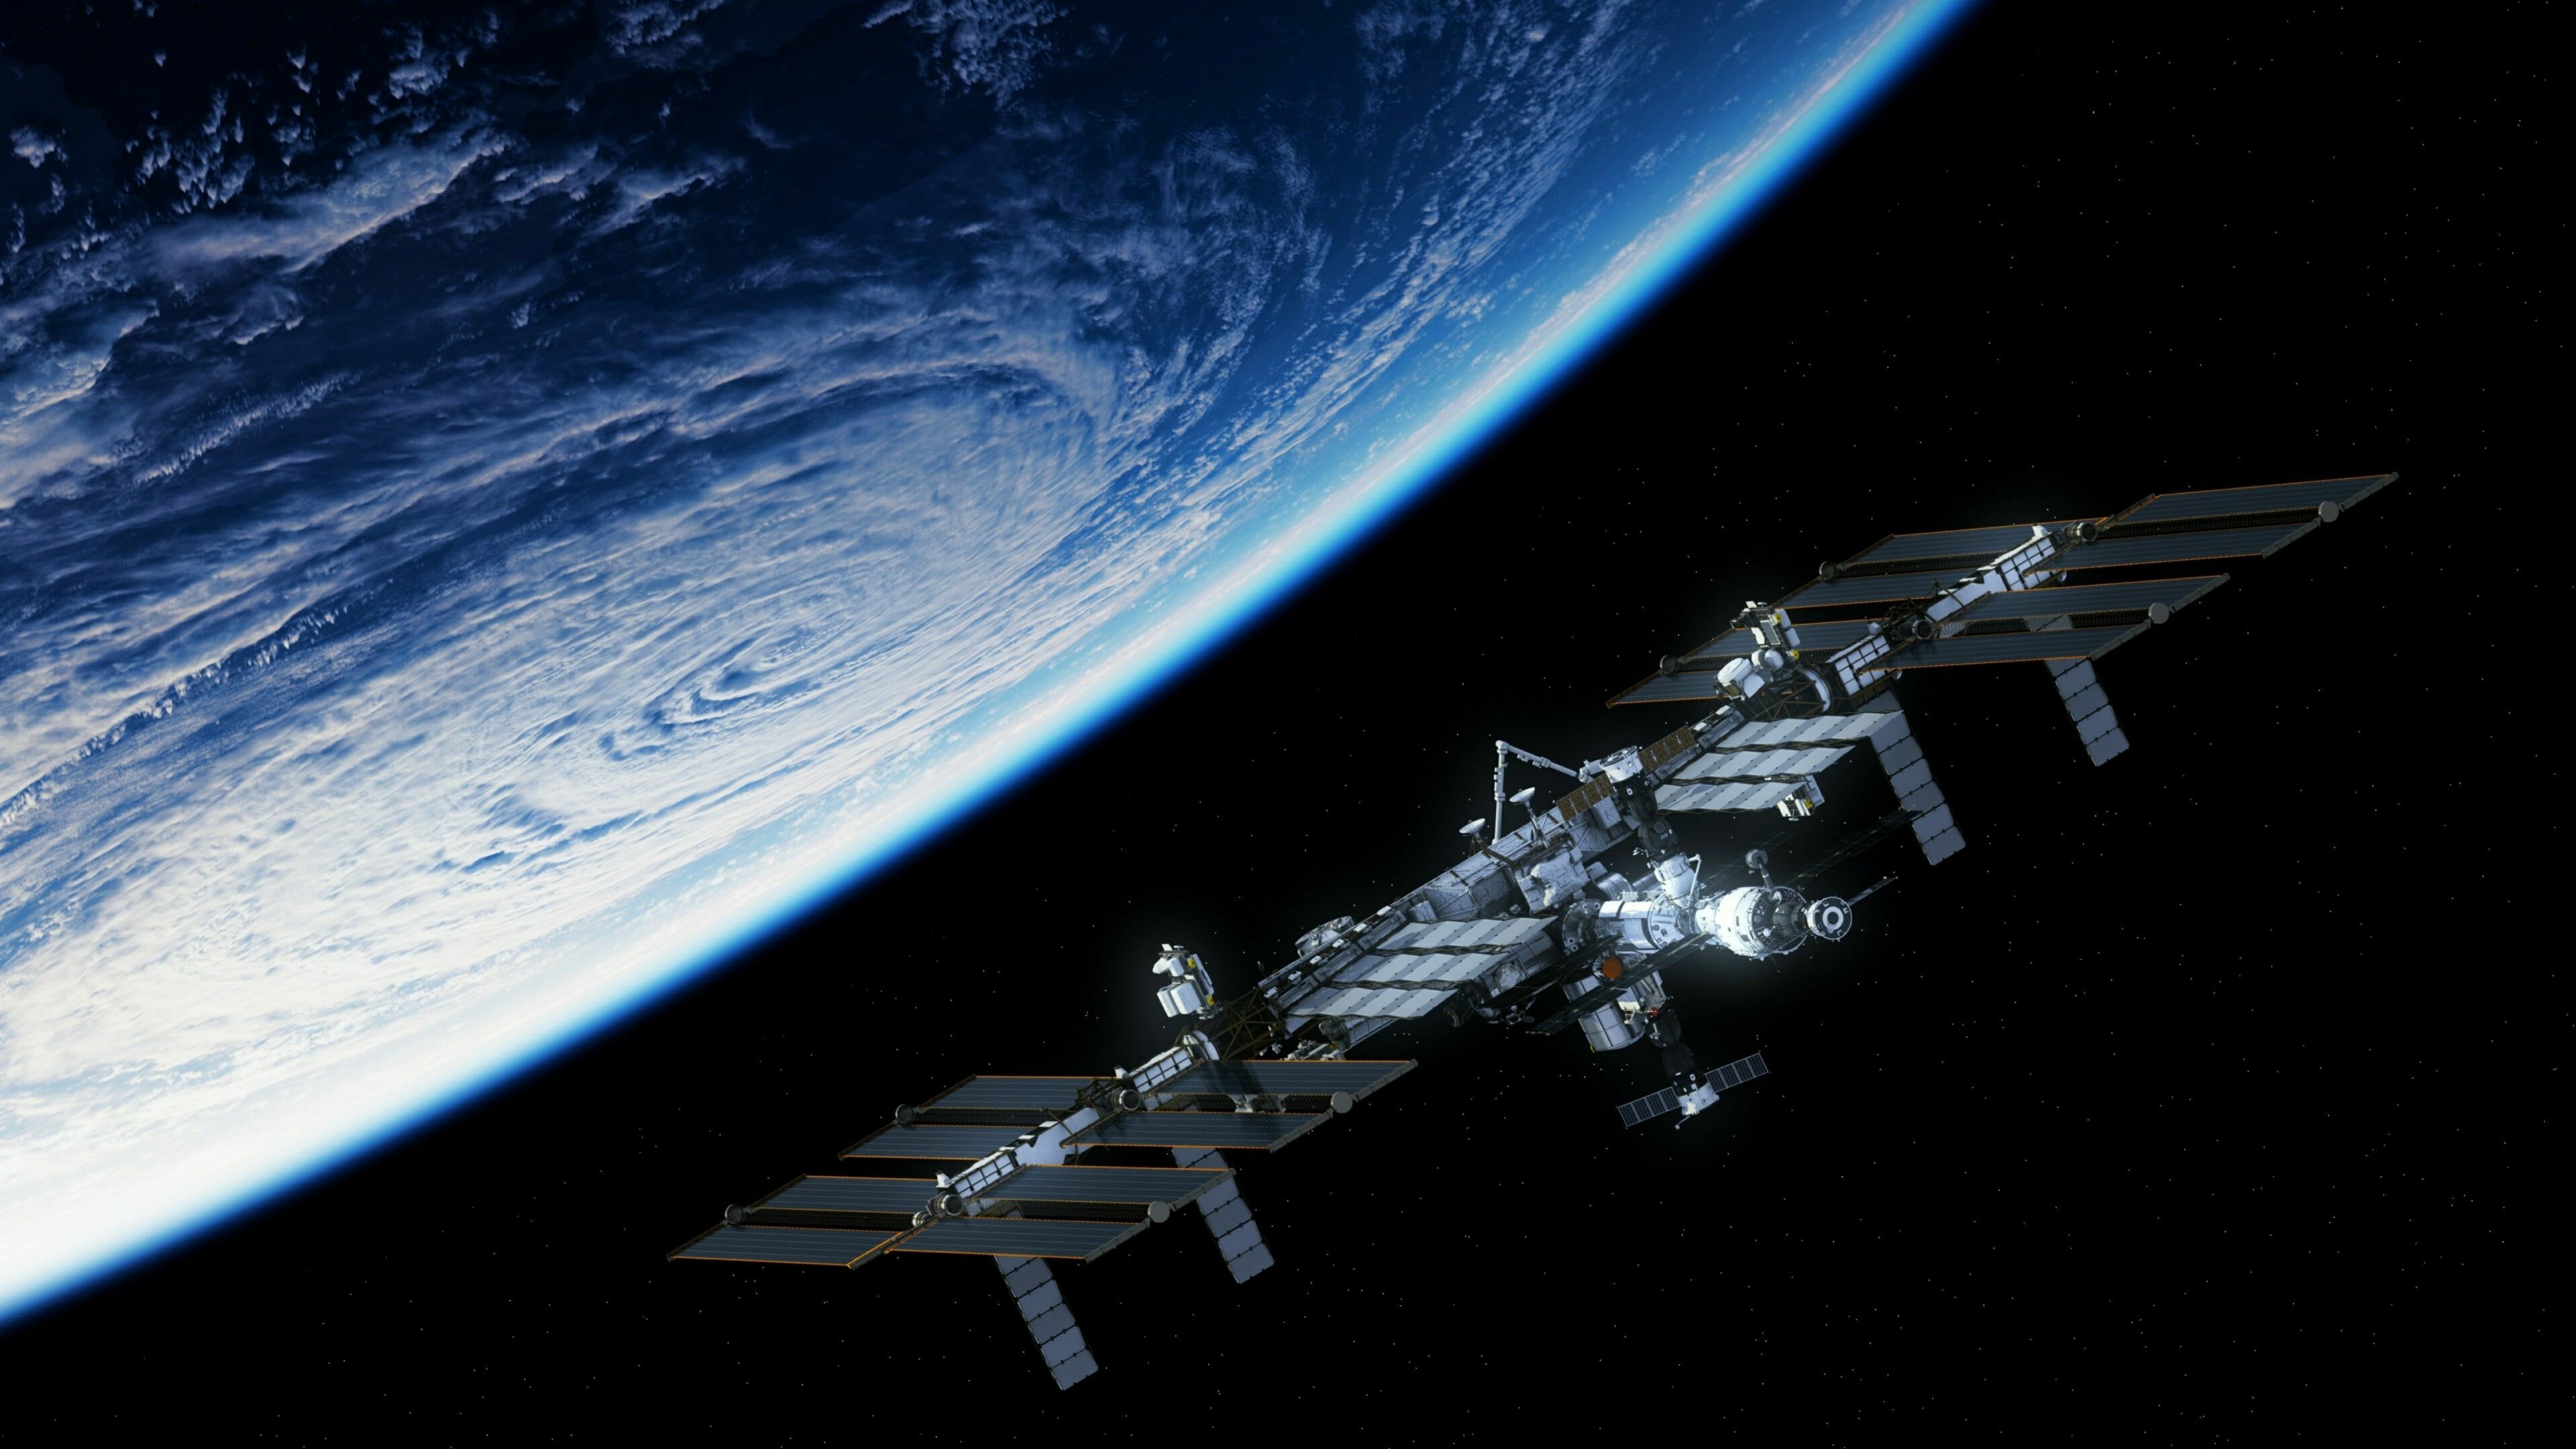 International Space Station: ISS, The largest modular space station in low Earth orbit. 3840x2160 4K Wallpaper.